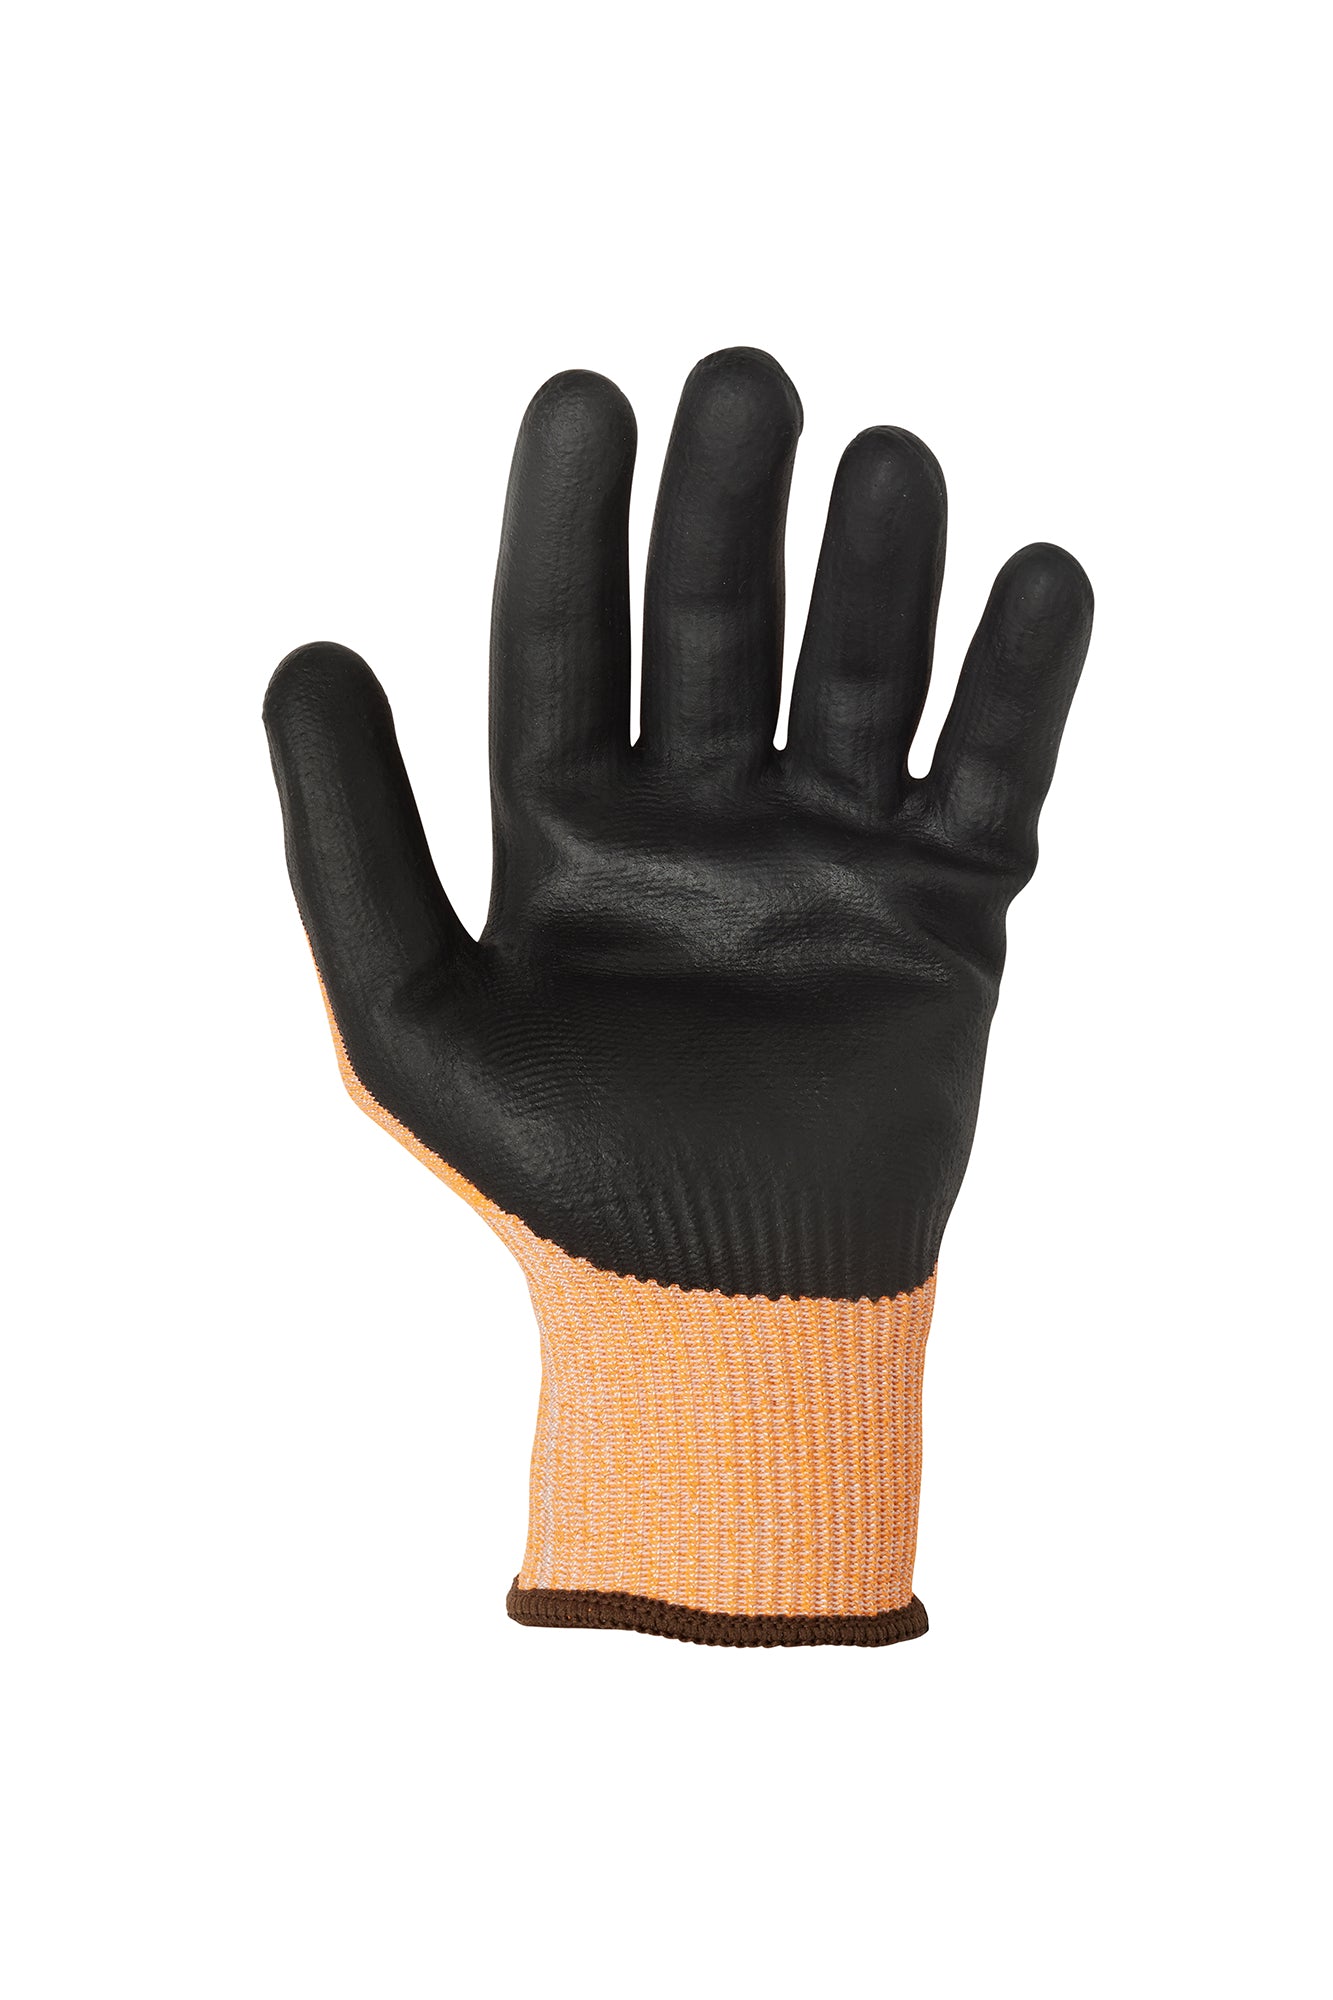 Loop Touchscreen Safety Cut Gloves